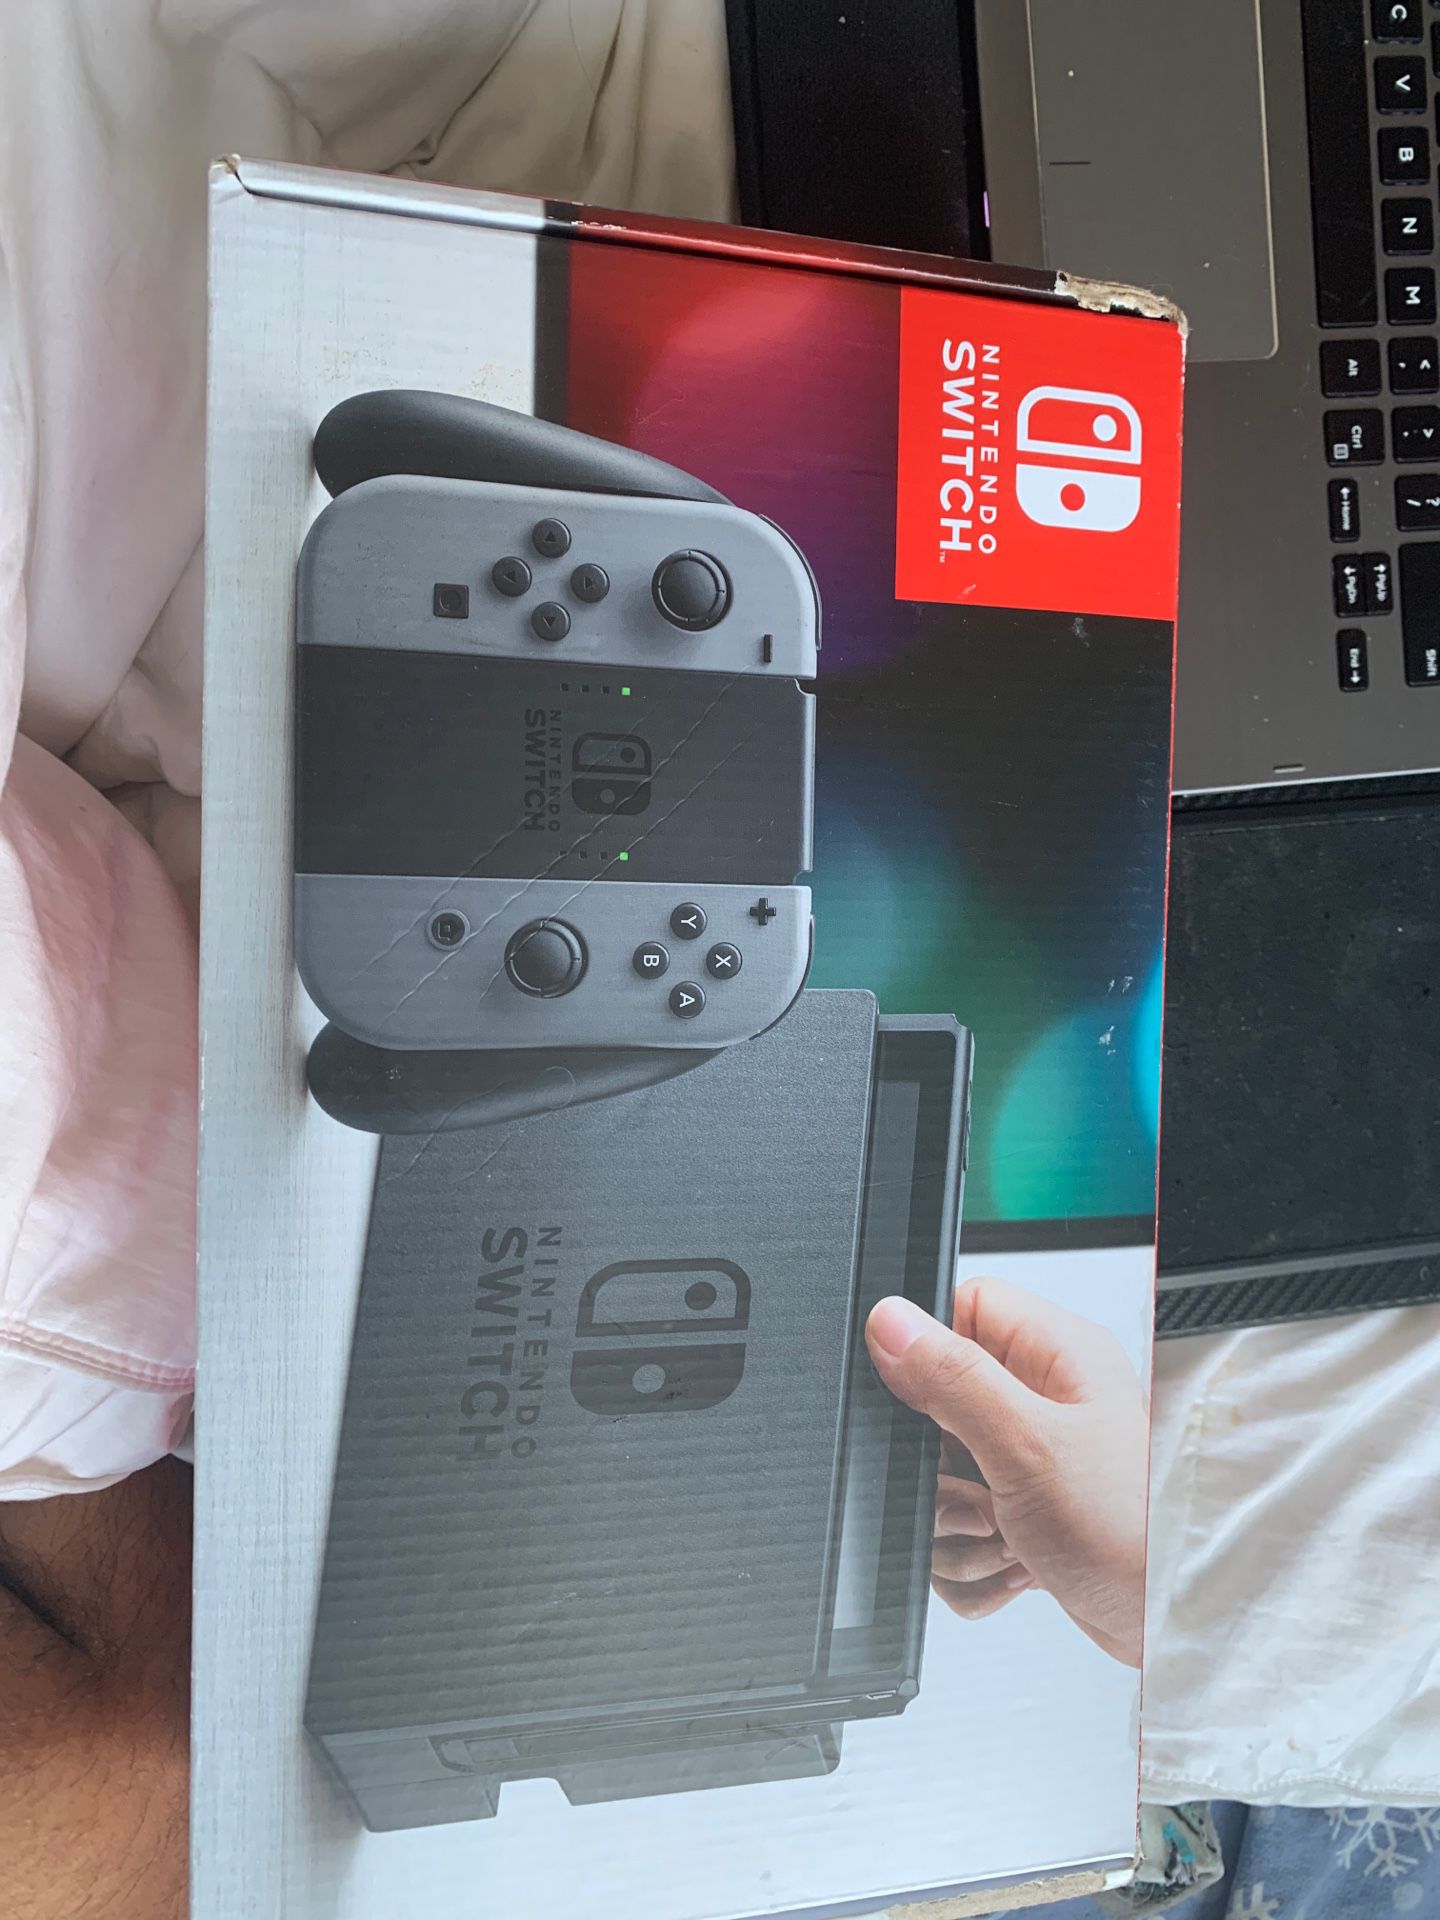 Used Nintendo switch missing the dock